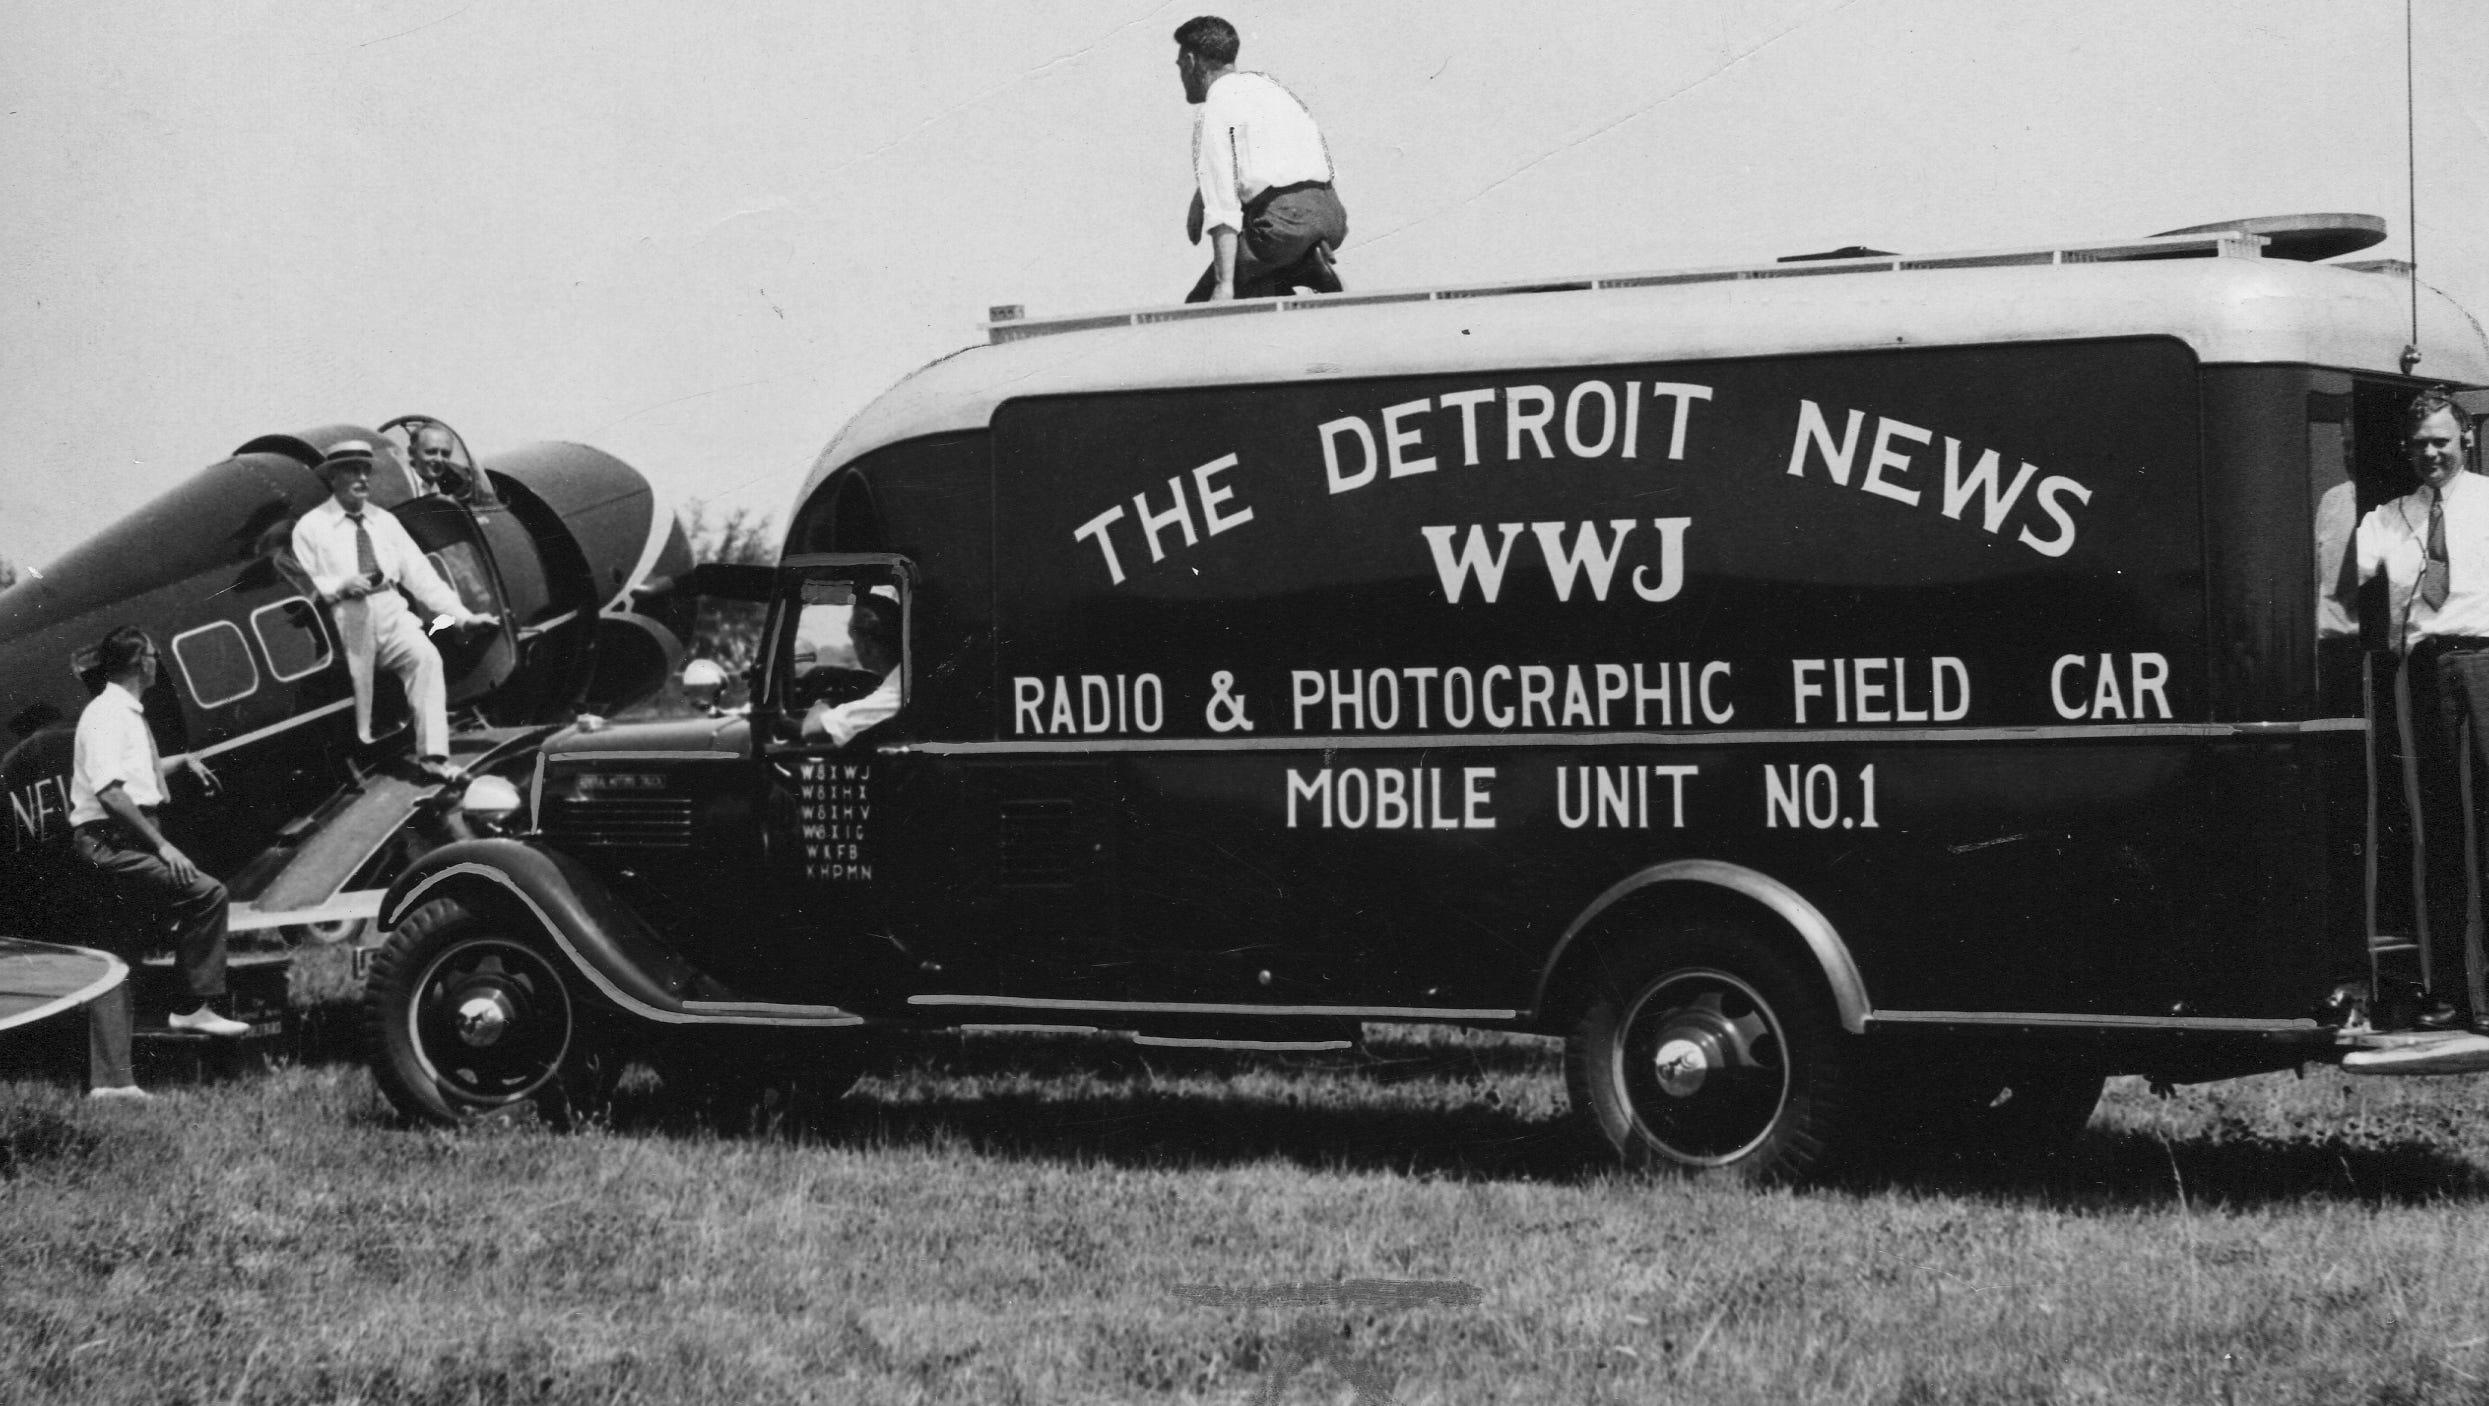 The Detroit News WWJ Photographic and Radio Mobile Unit was built in 1936.  It was a newspaper office and radio broadcasting station on wheels, housing a portable short-wave radio transmitter, a dark room and a photo transmitter.  It was built on a large truck chassis with a specially designed body (painted in Detroit News red) and a catwalk for photographers that extended the length of the roof.